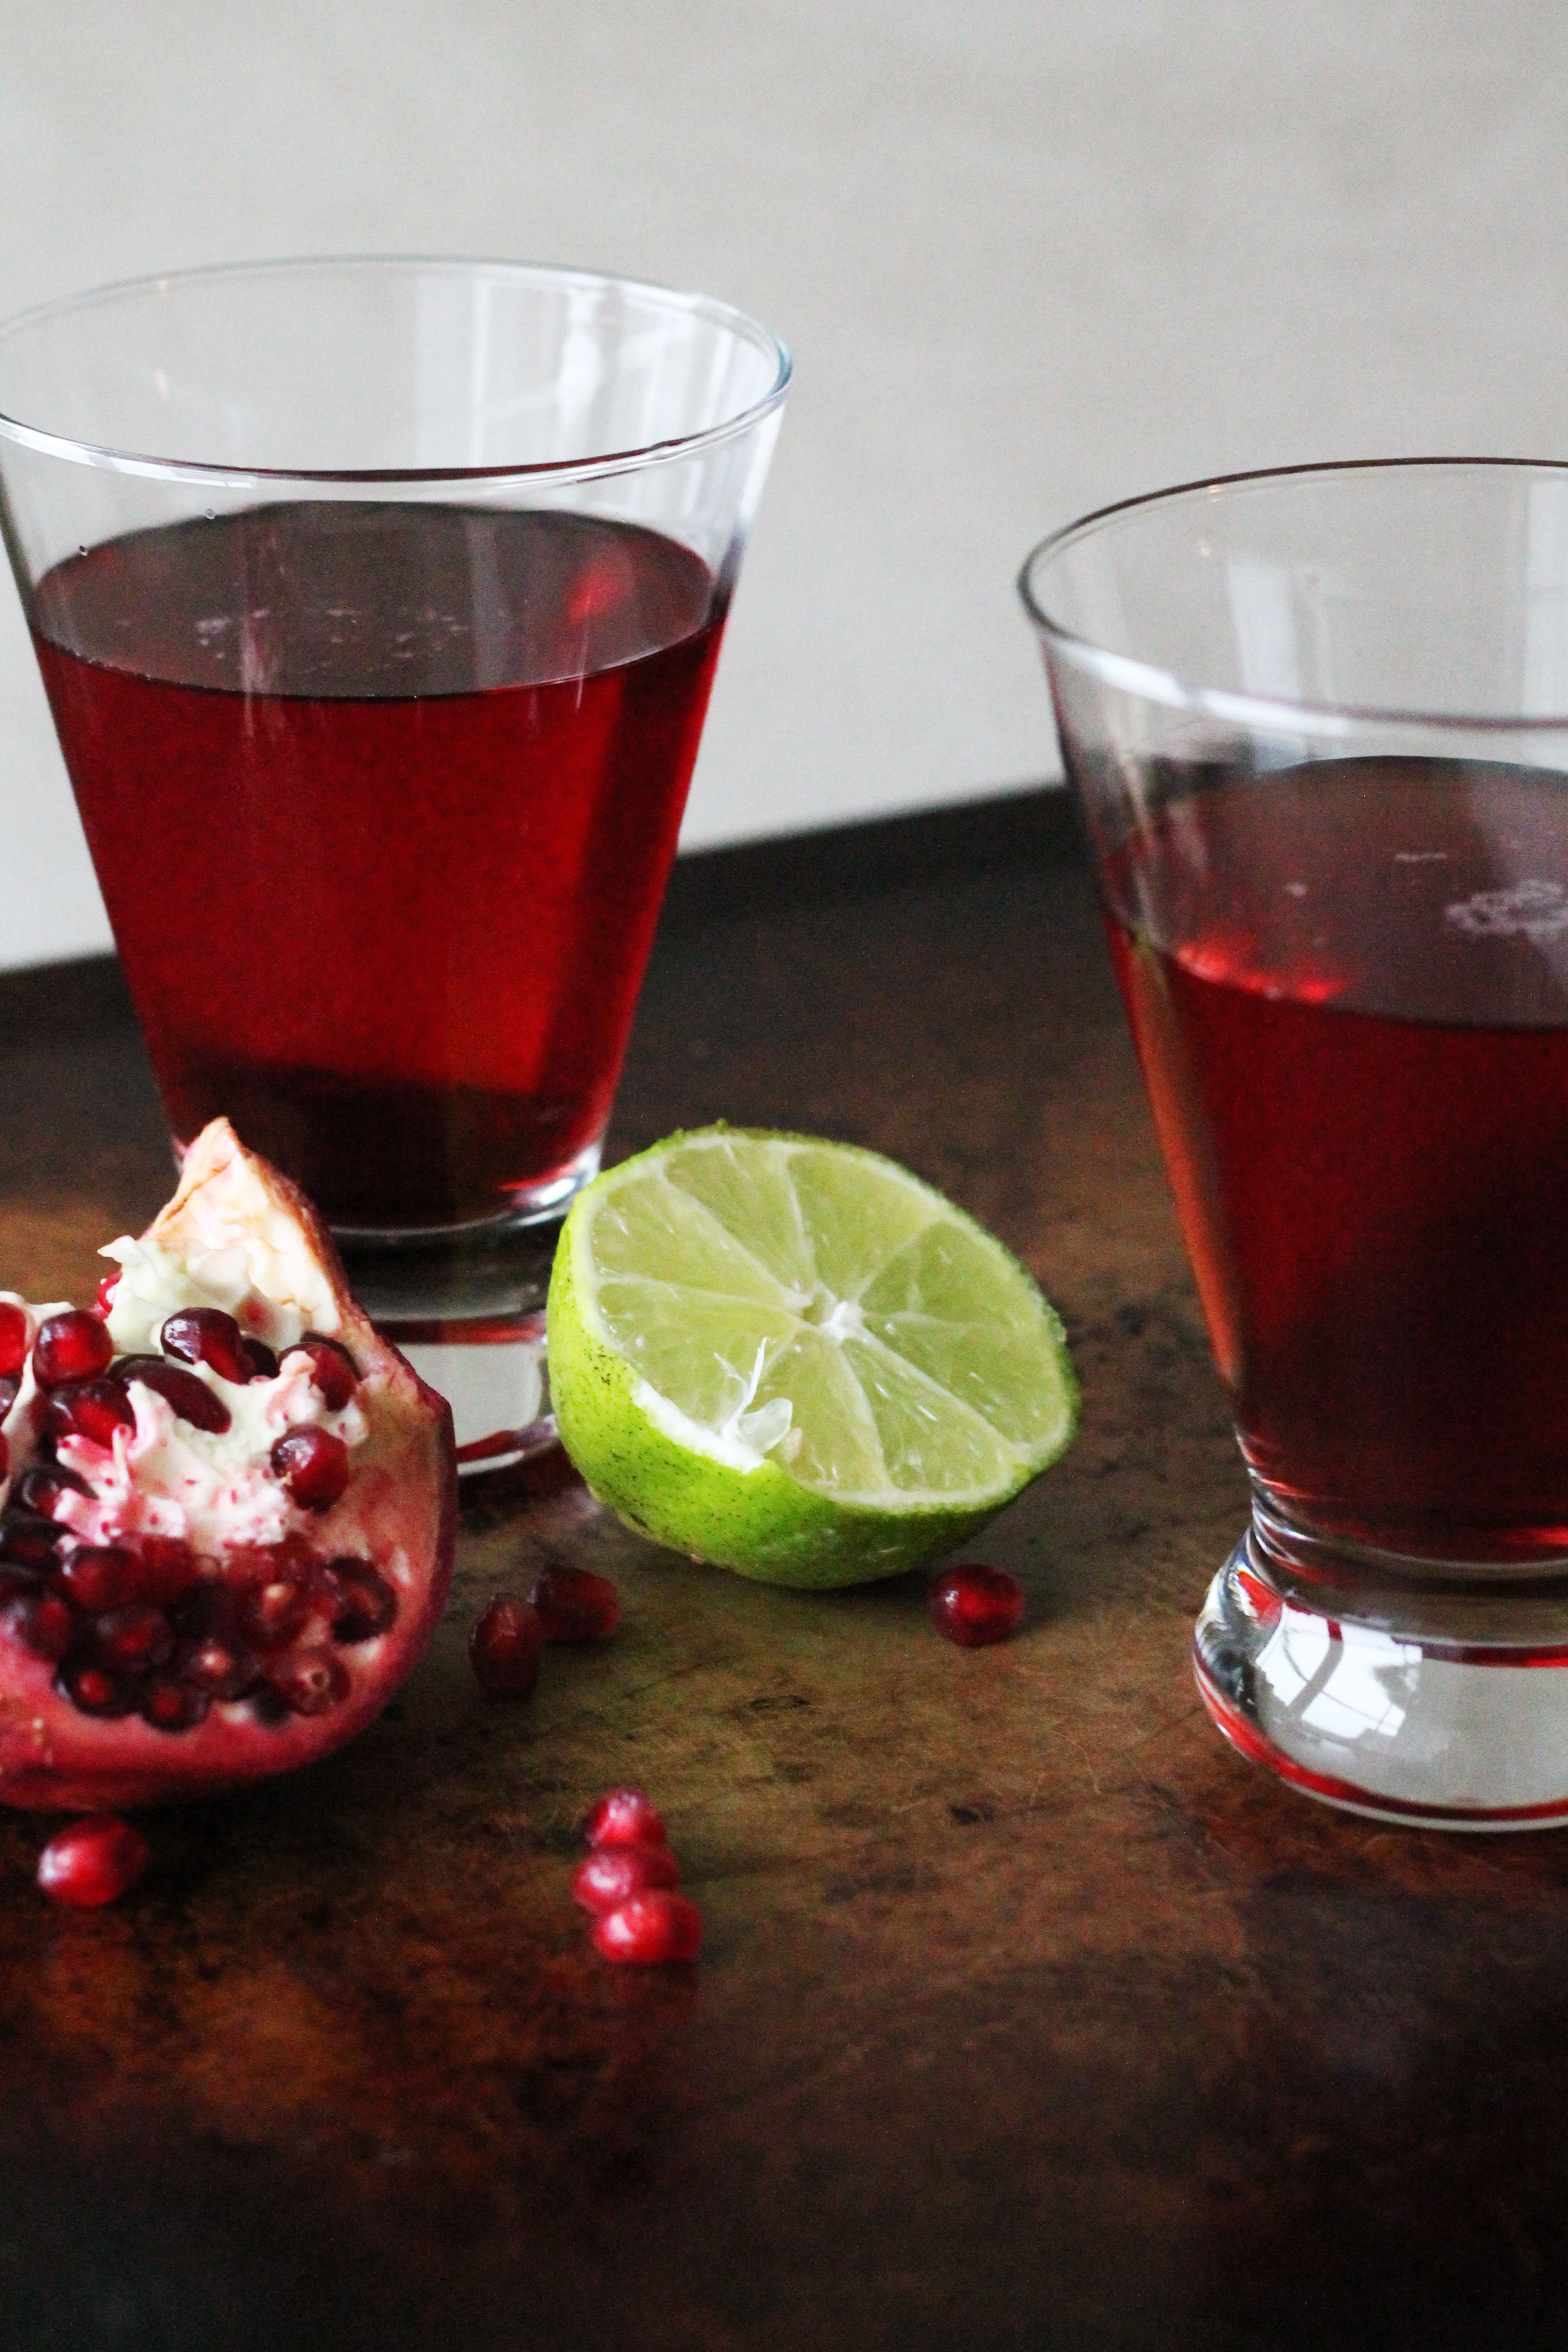 A festive and winter cocktail - Pomegranate Lime Martini